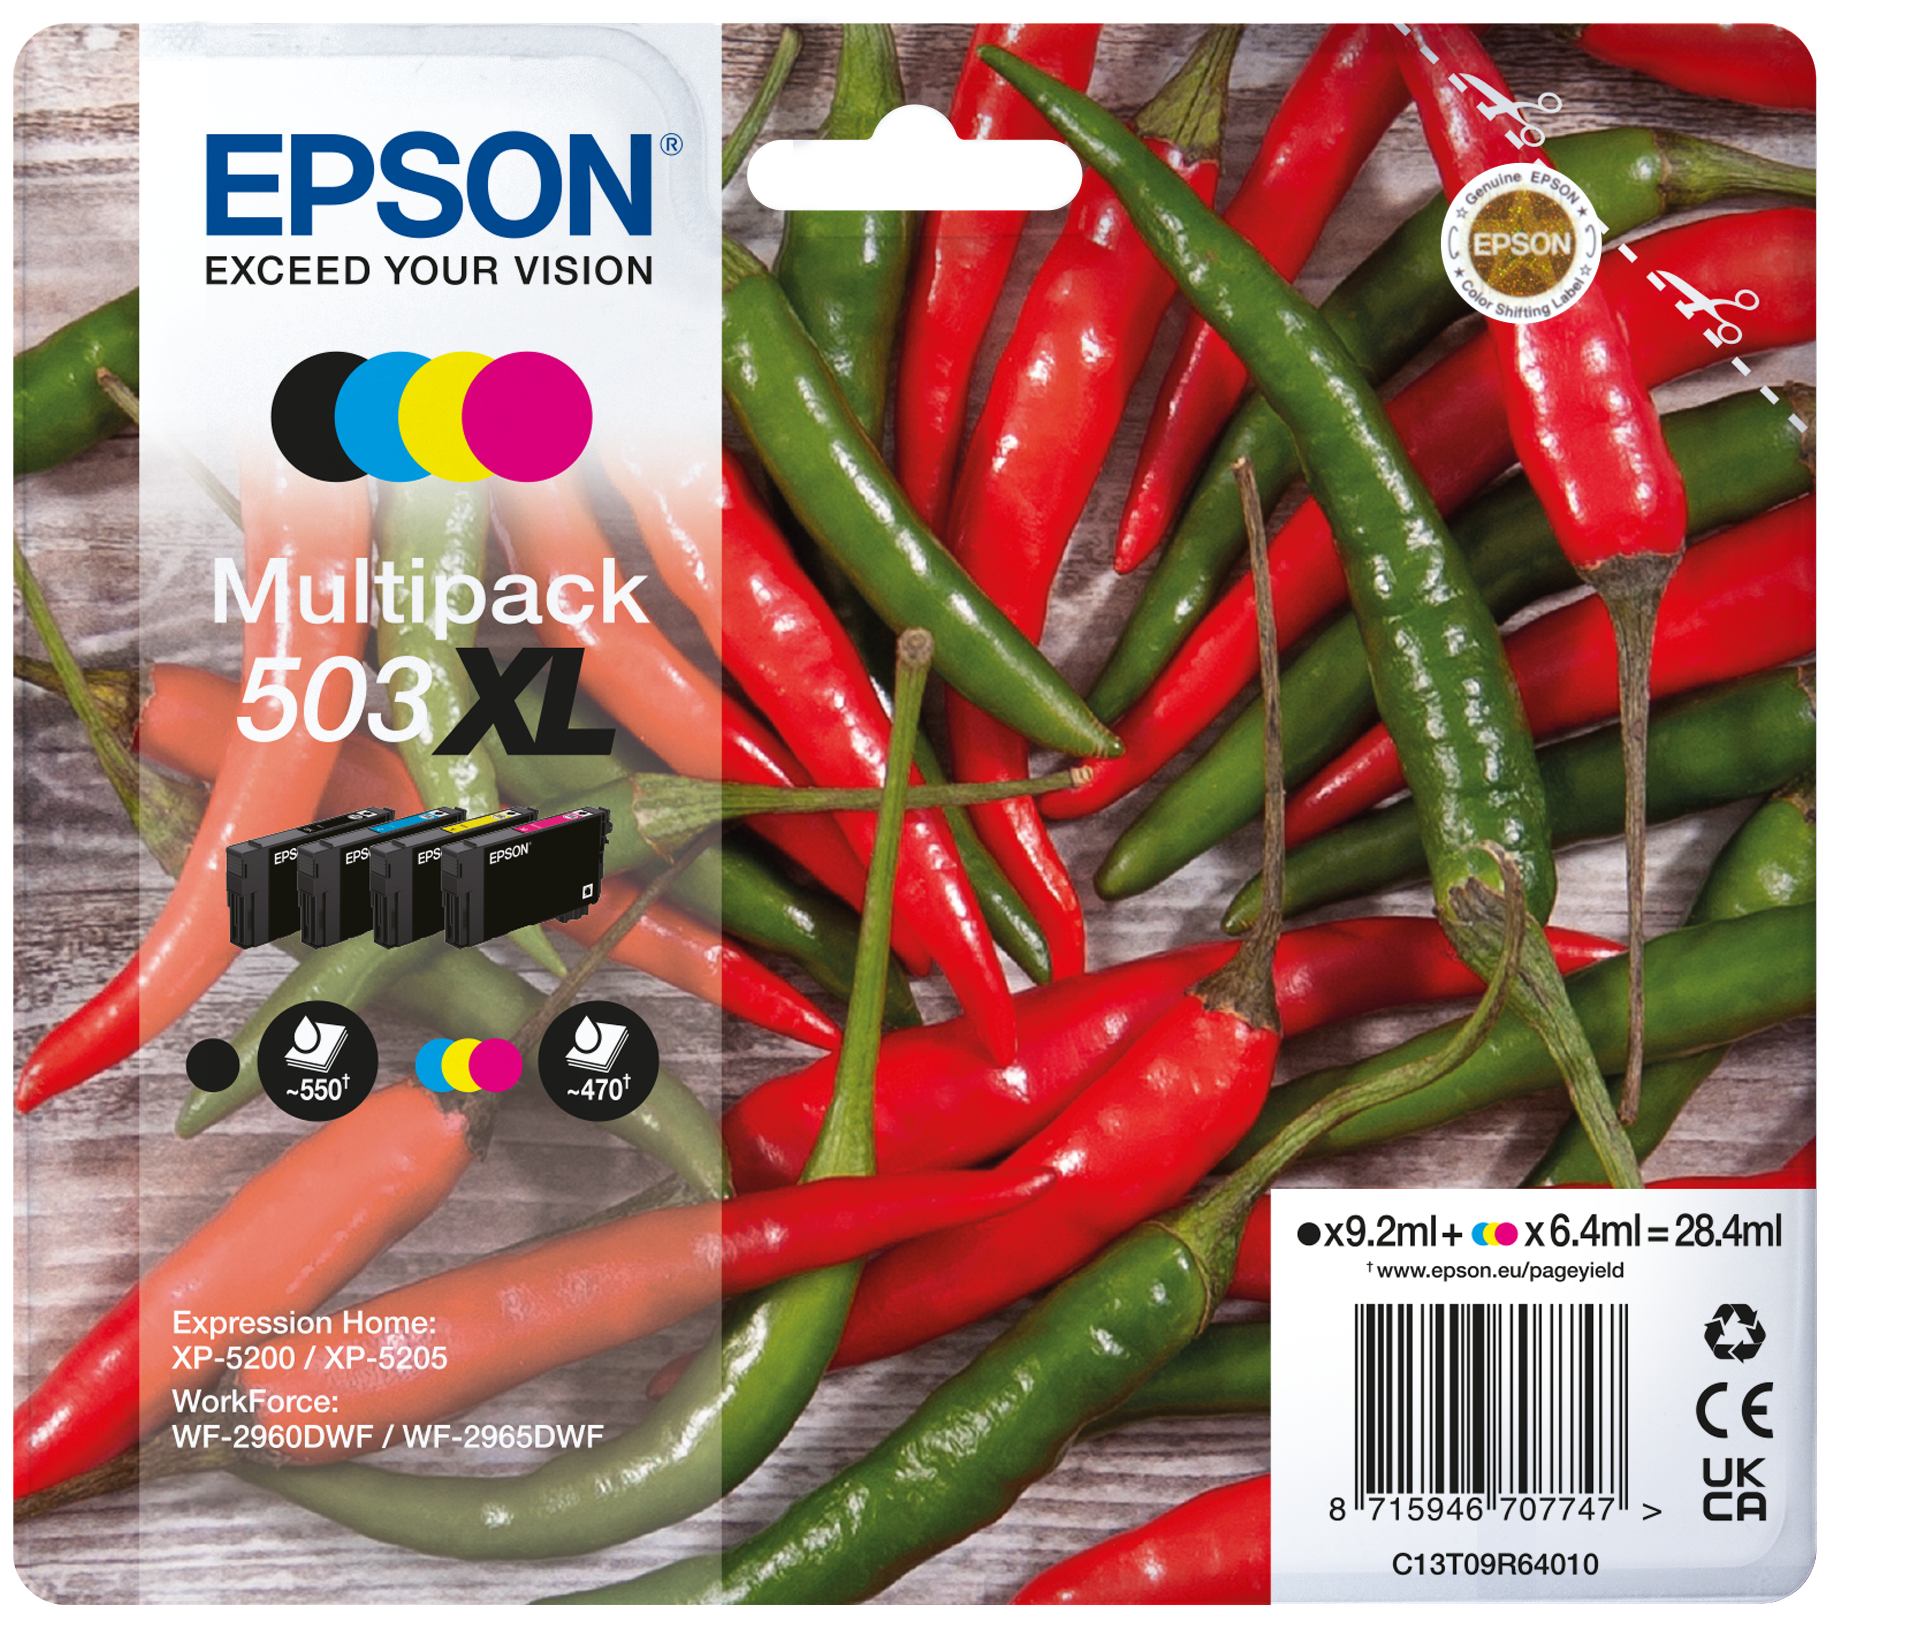 https://i8.amplience.net/i/epsonemear/chillies_multipack_503xl_front_png